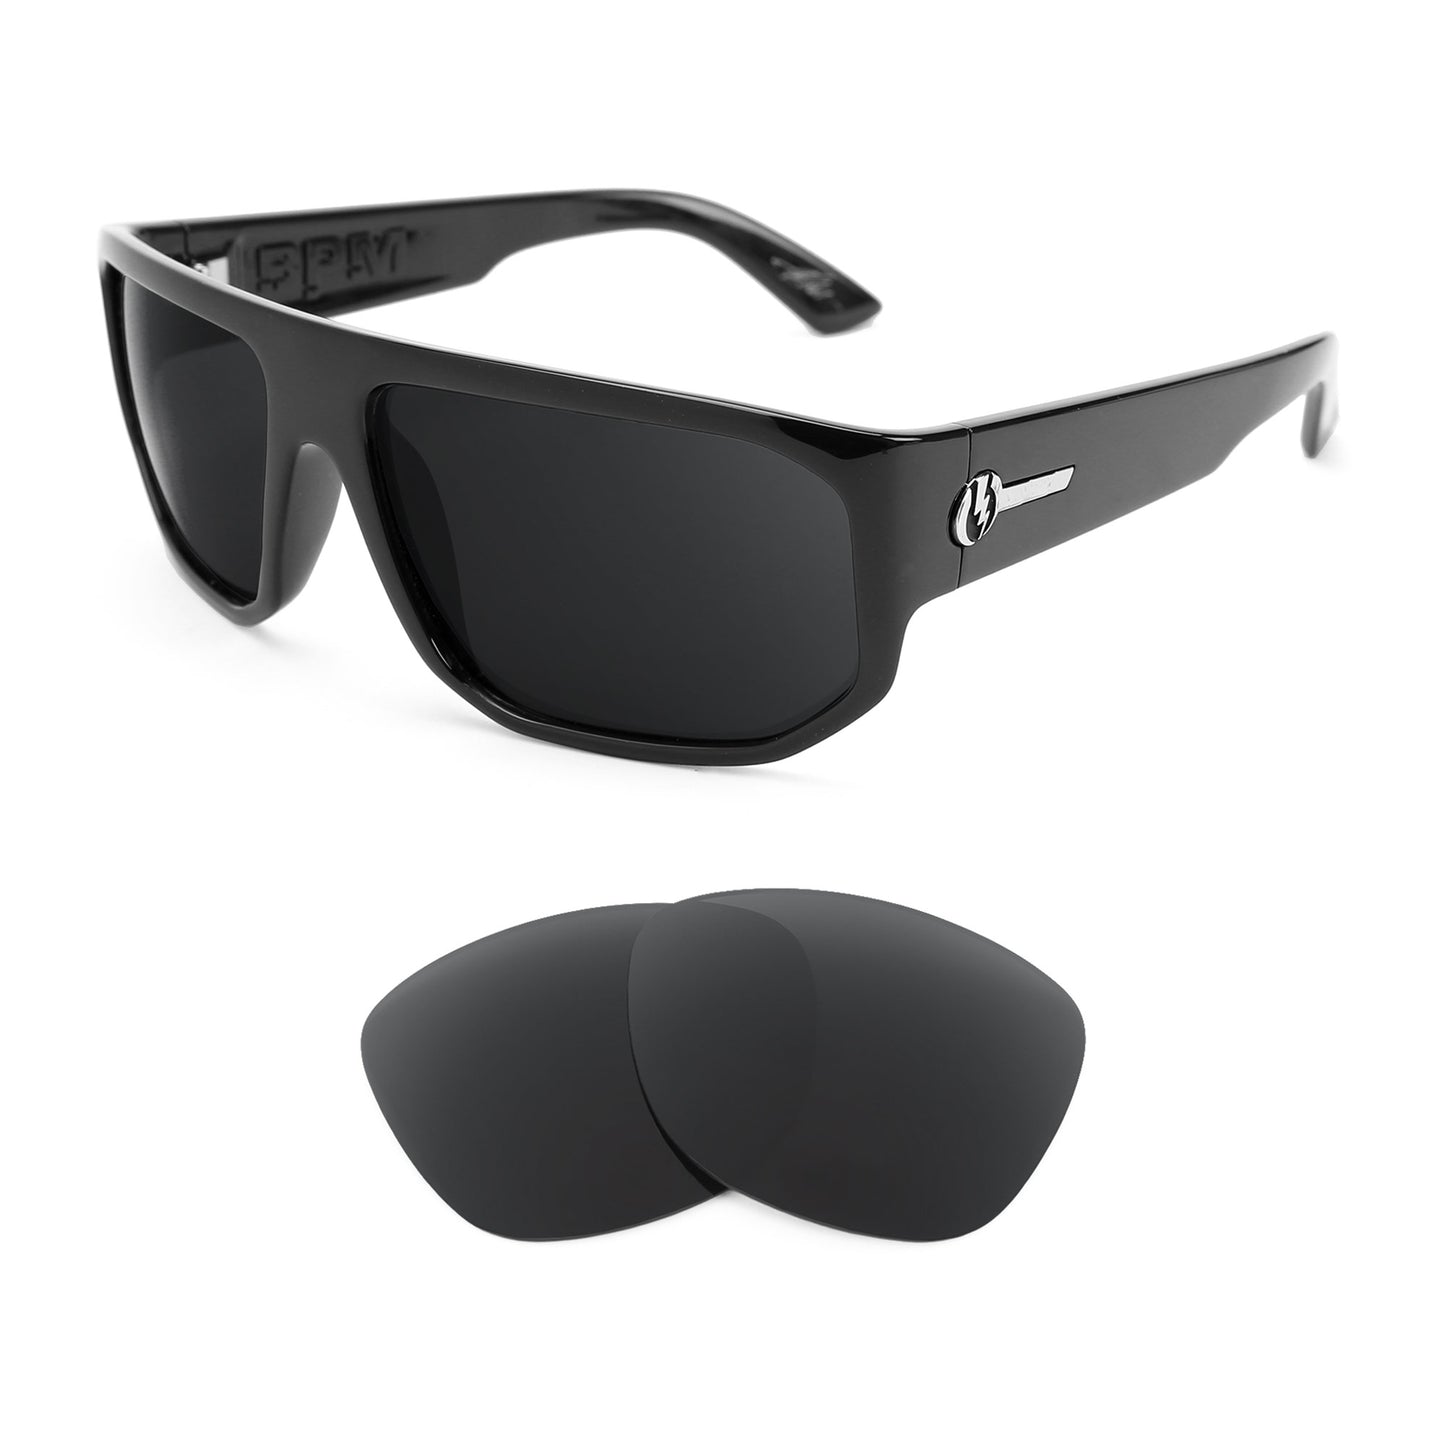 Electric BPM sunglasses with replacement lenses